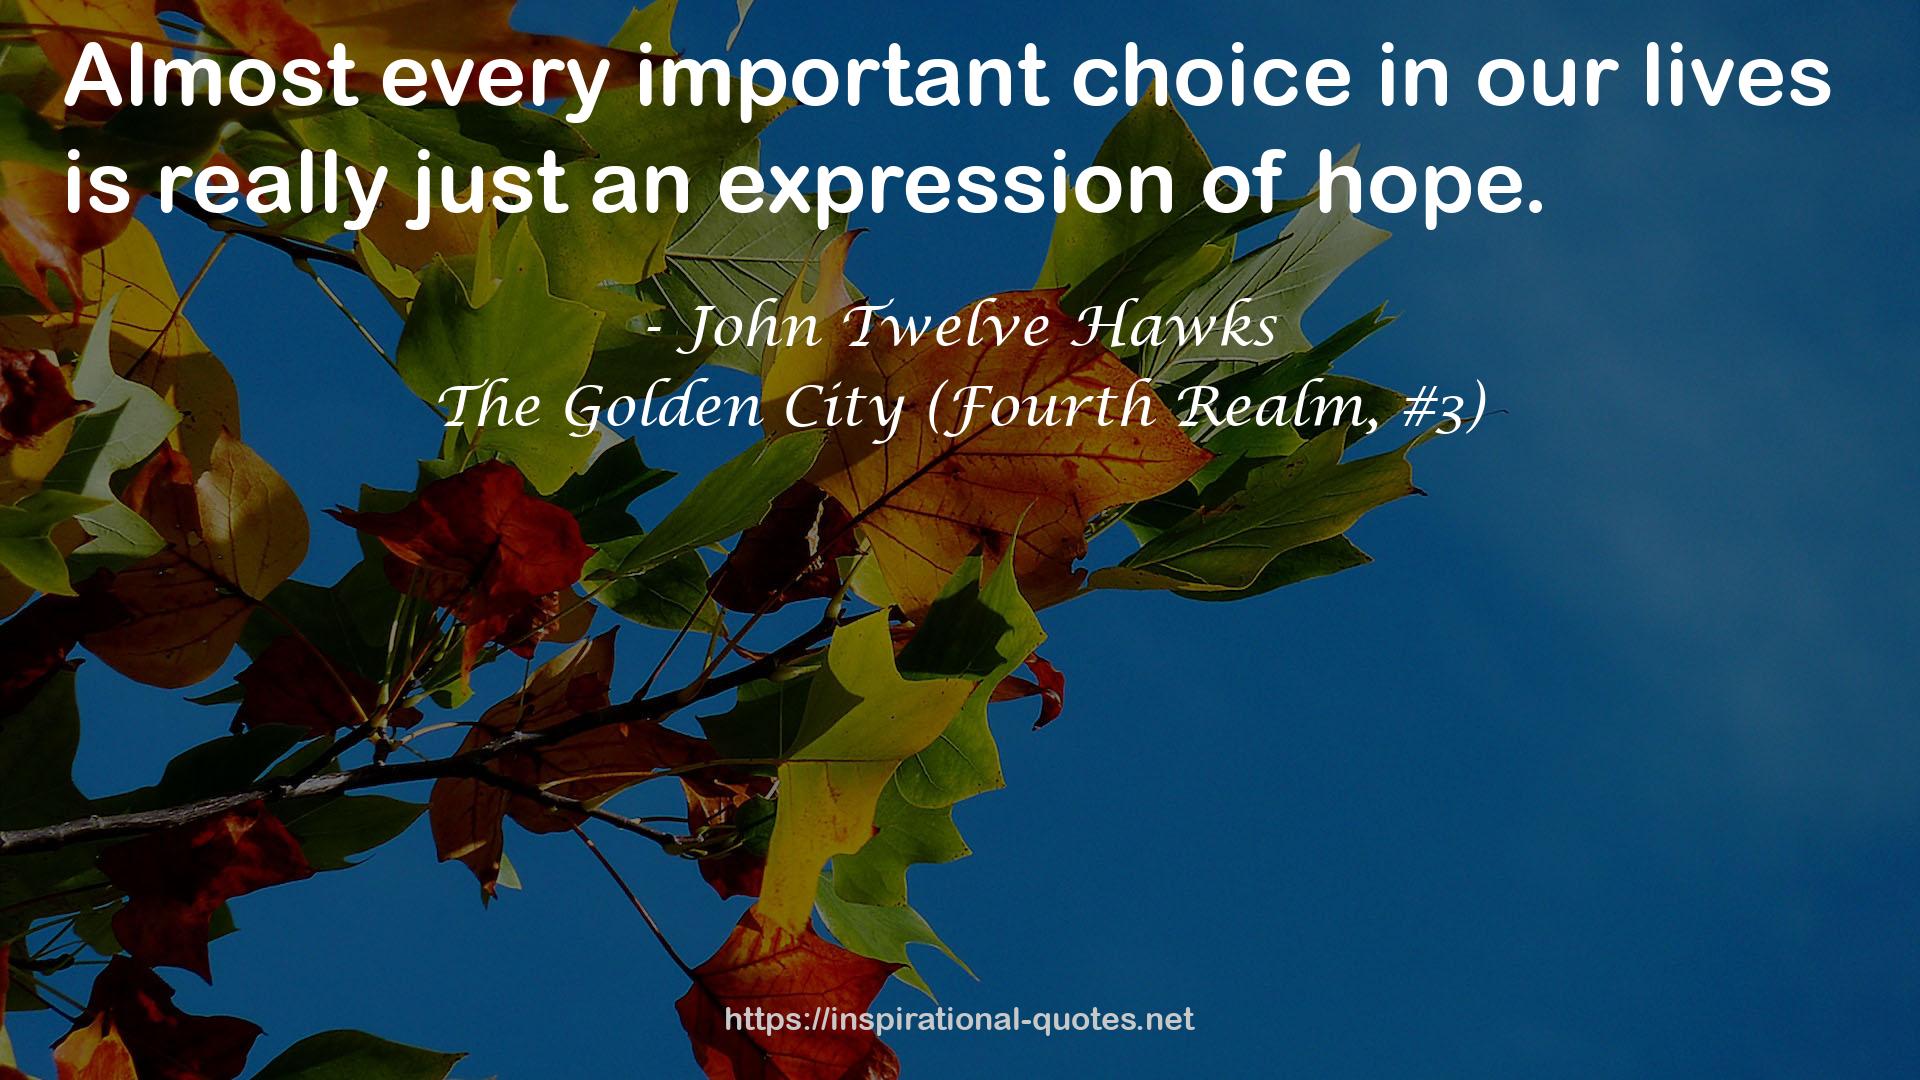 The Golden City (Fourth Realm, #3) QUOTES